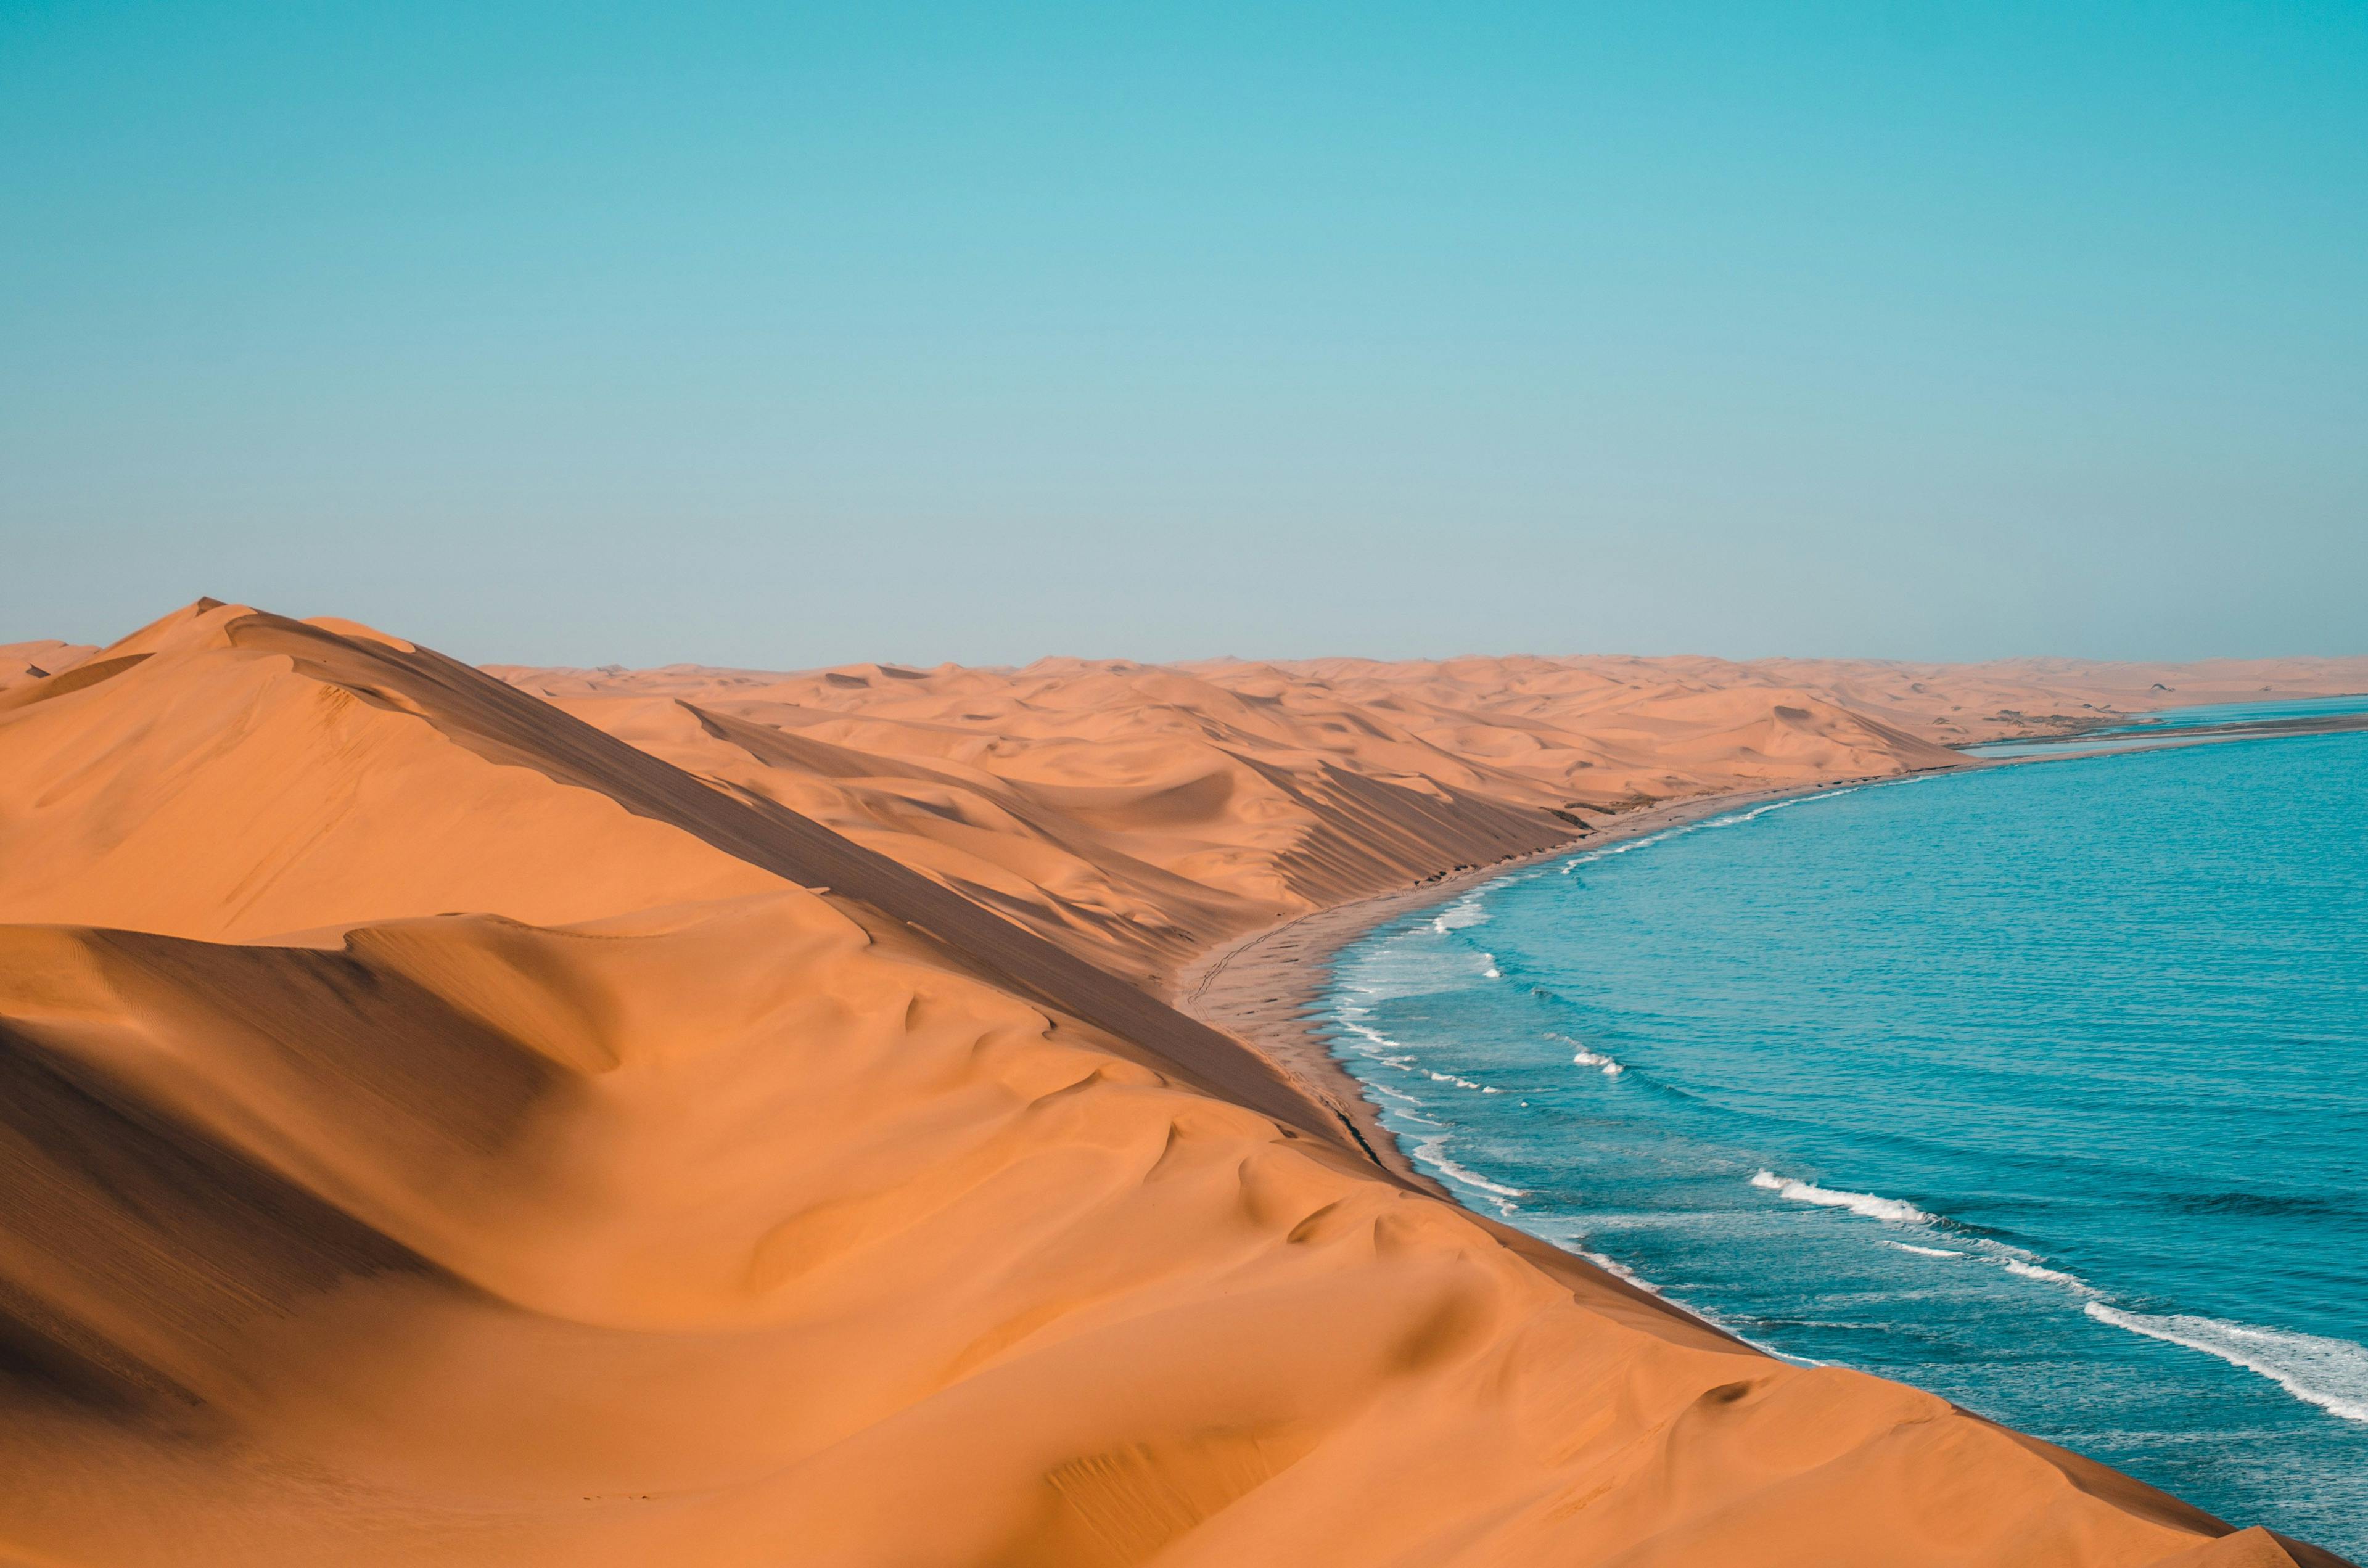 Sandwich Harbour in Namibia.